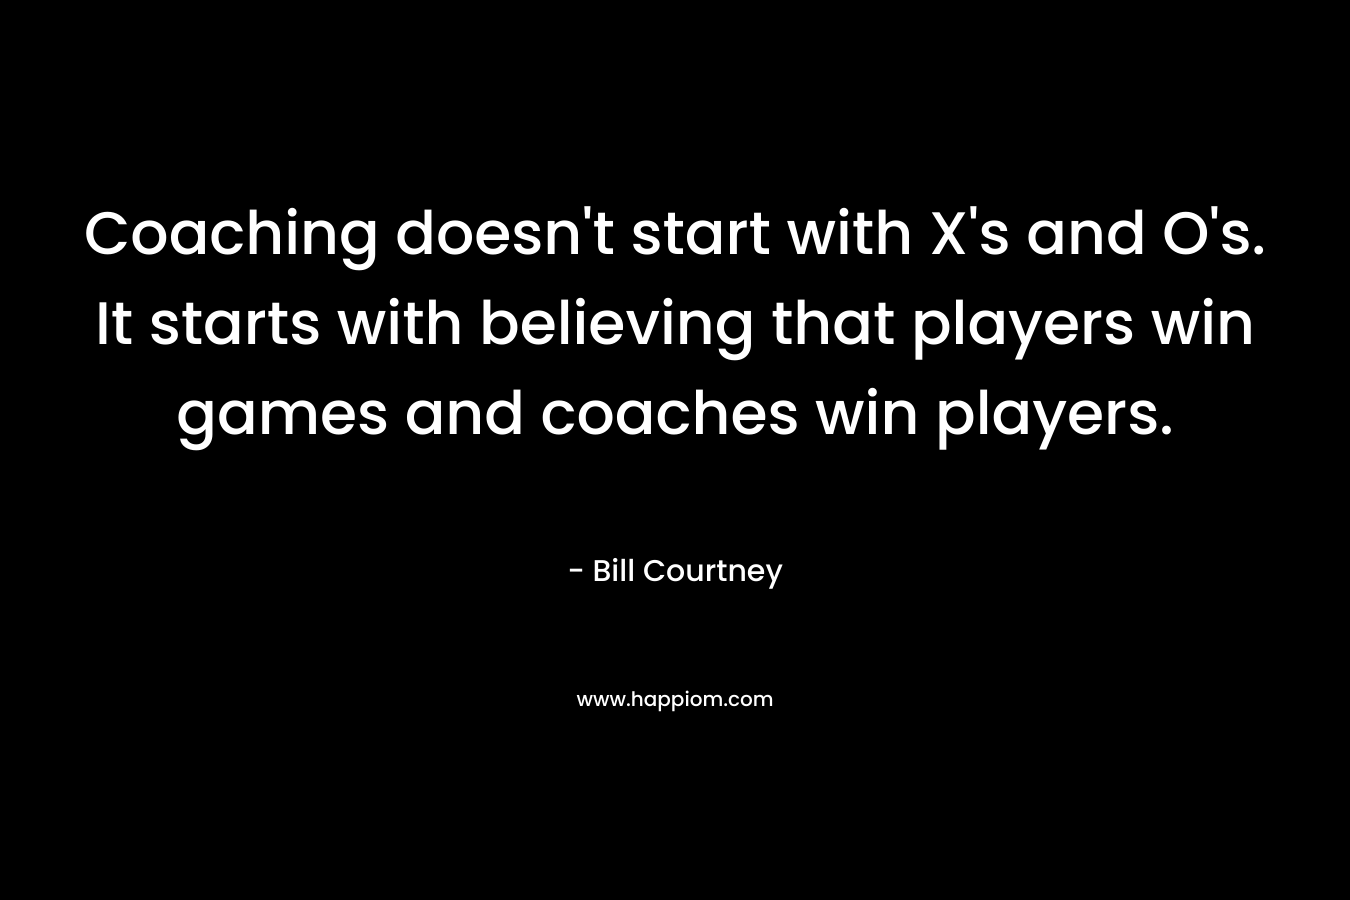 Coaching doesn't start with X's and O's. It starts with believing that players win games and coaches win players.